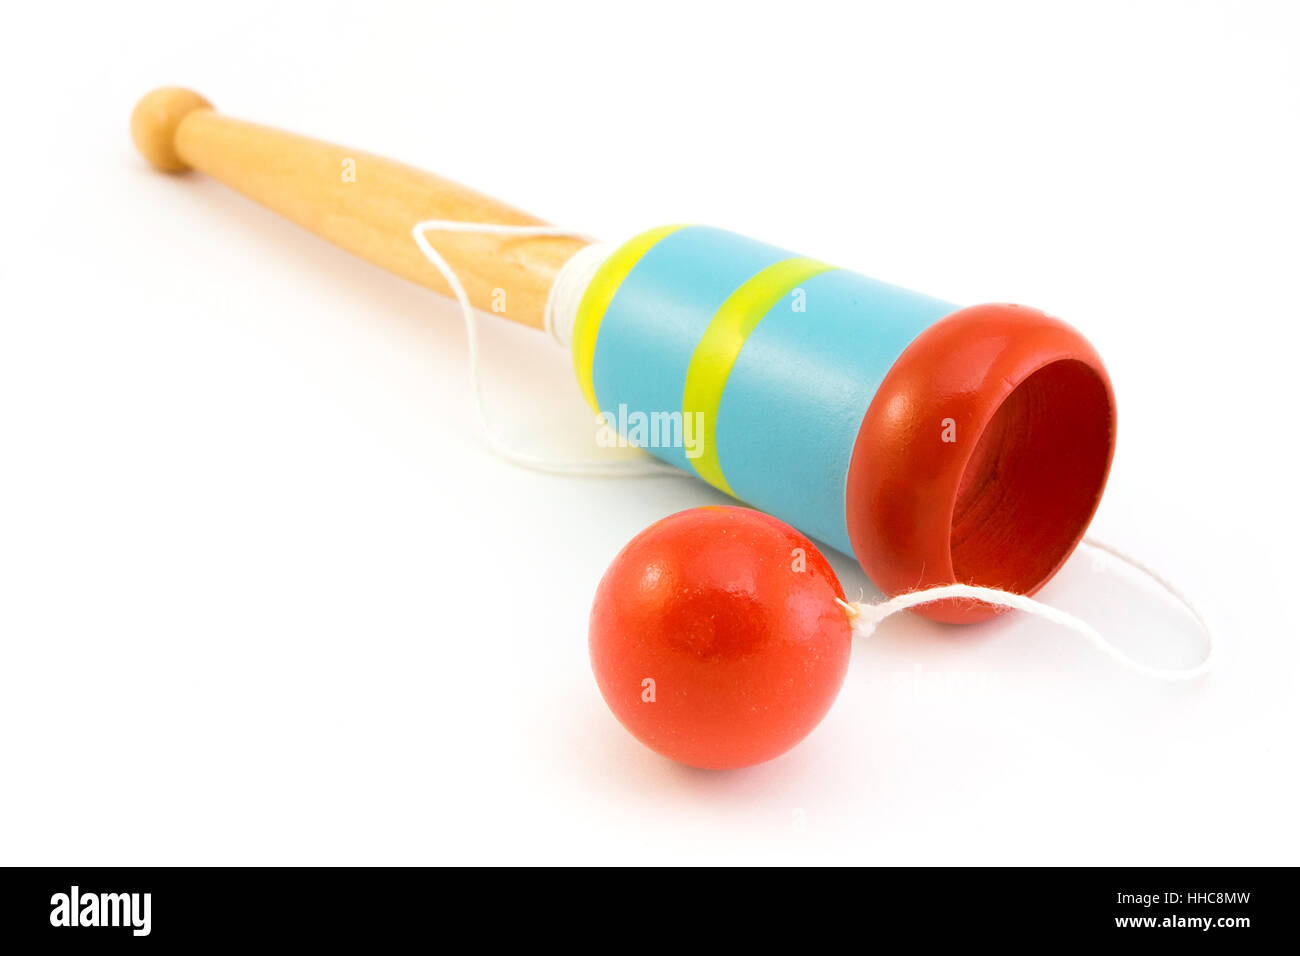 cup, isolated, ball, vintage, toy, retro, wooden, cup, blue, game, tournament, Stock Photo